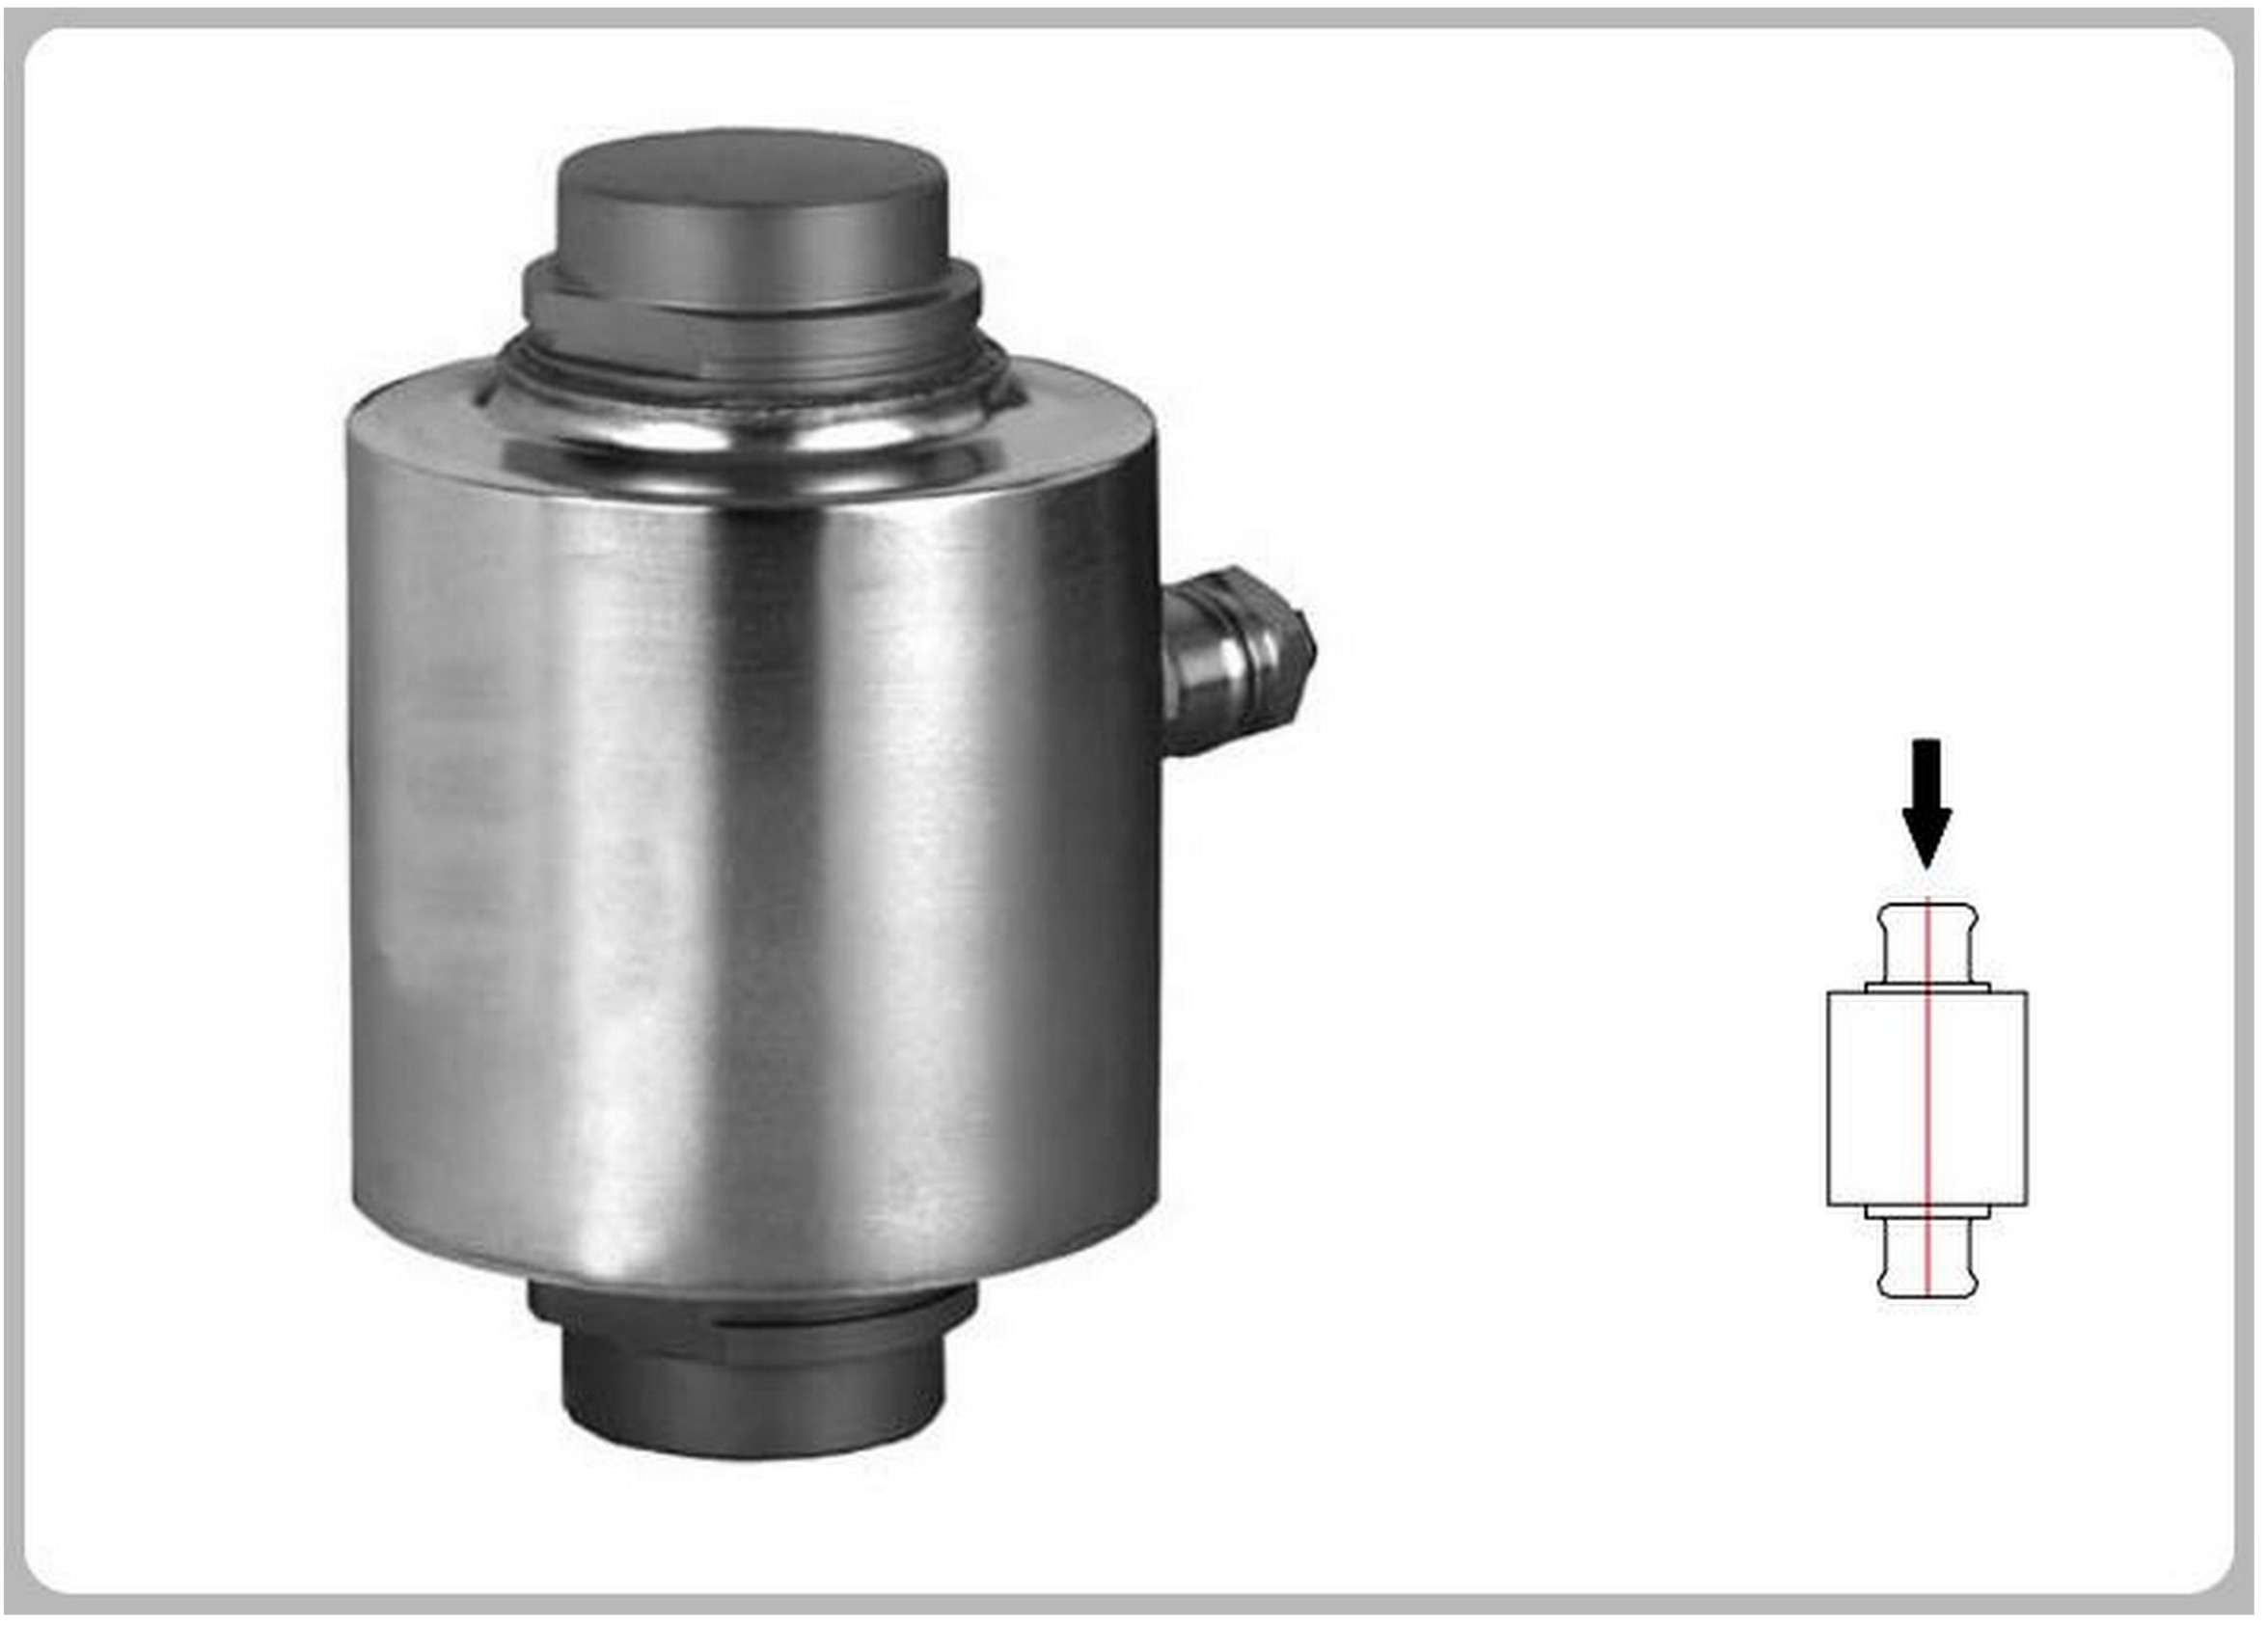 MC8217 LOAD CELL & FORCE TRANSDUCER